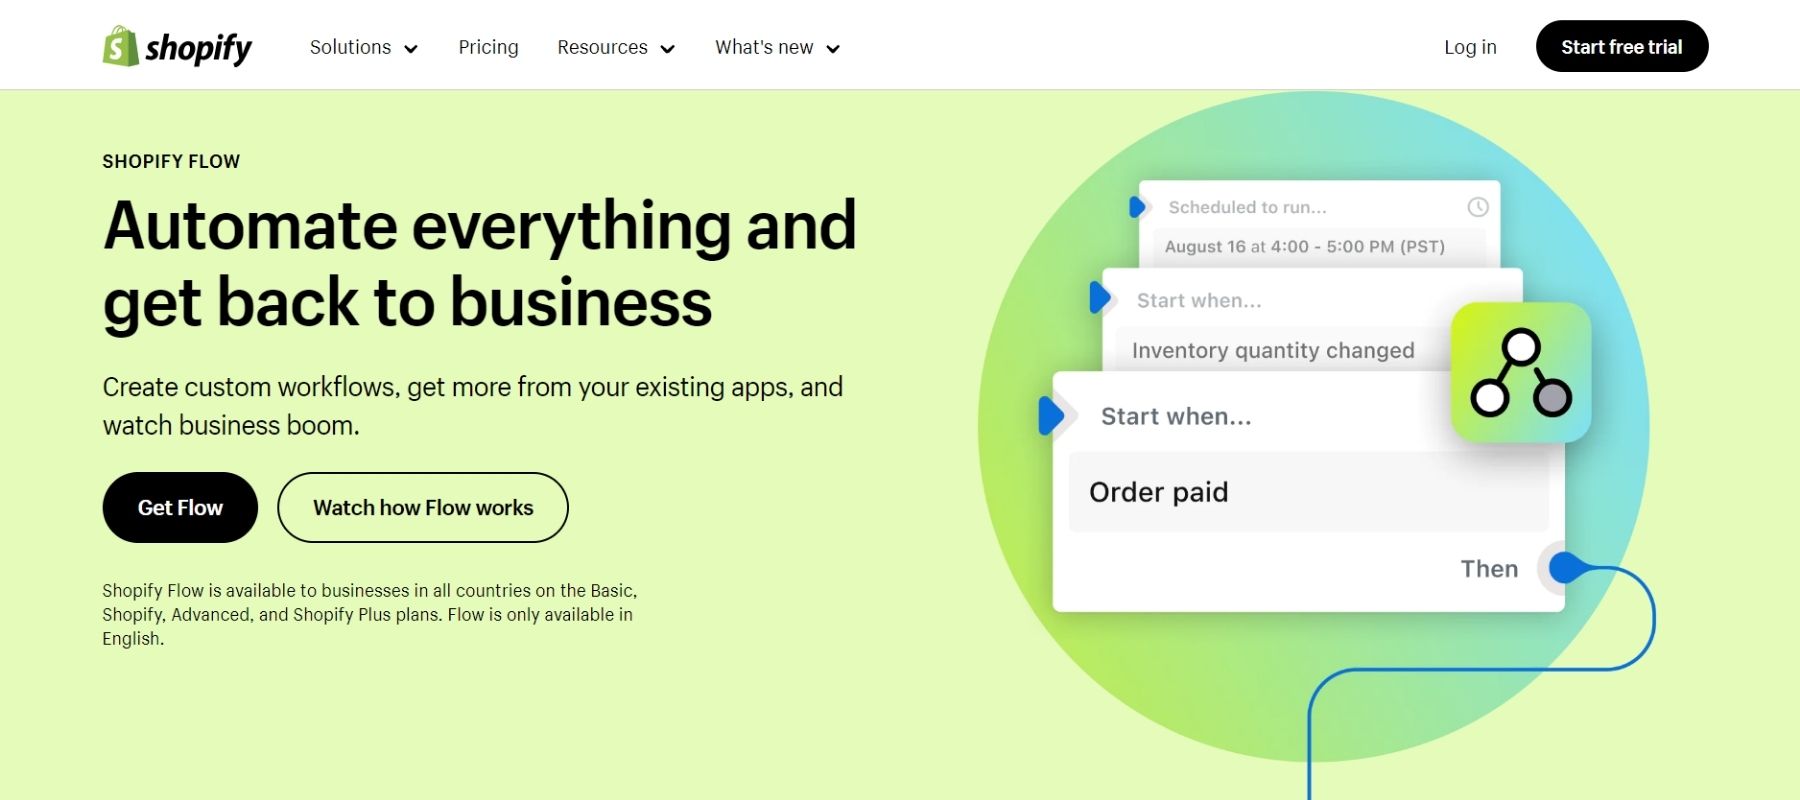 Shopify Flow’s homepage